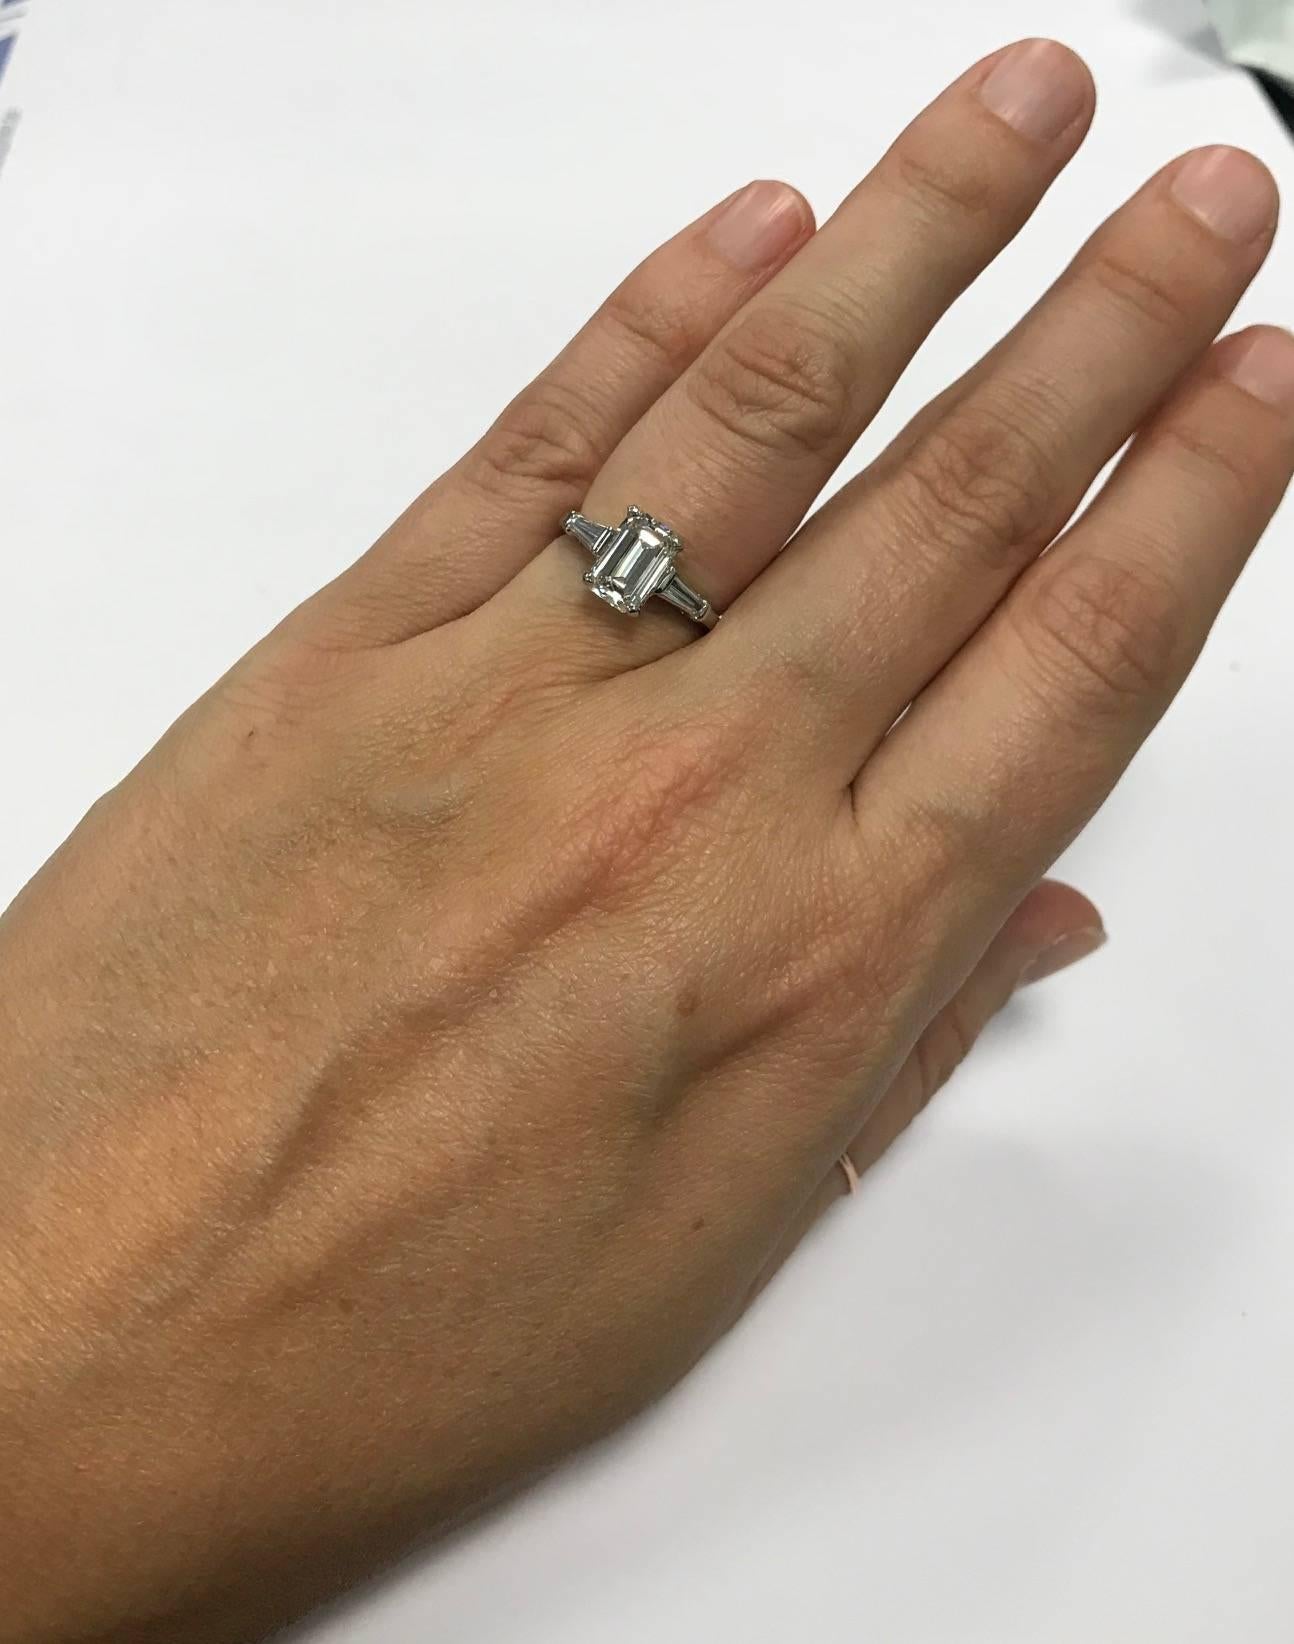 Beautiful emerald cut diamond mounted in a platinum ring with two tapered baguettes on the sides weighing approximately .25 carat The center diamond has a certificate from the Gemological Institute of America stating that it is 